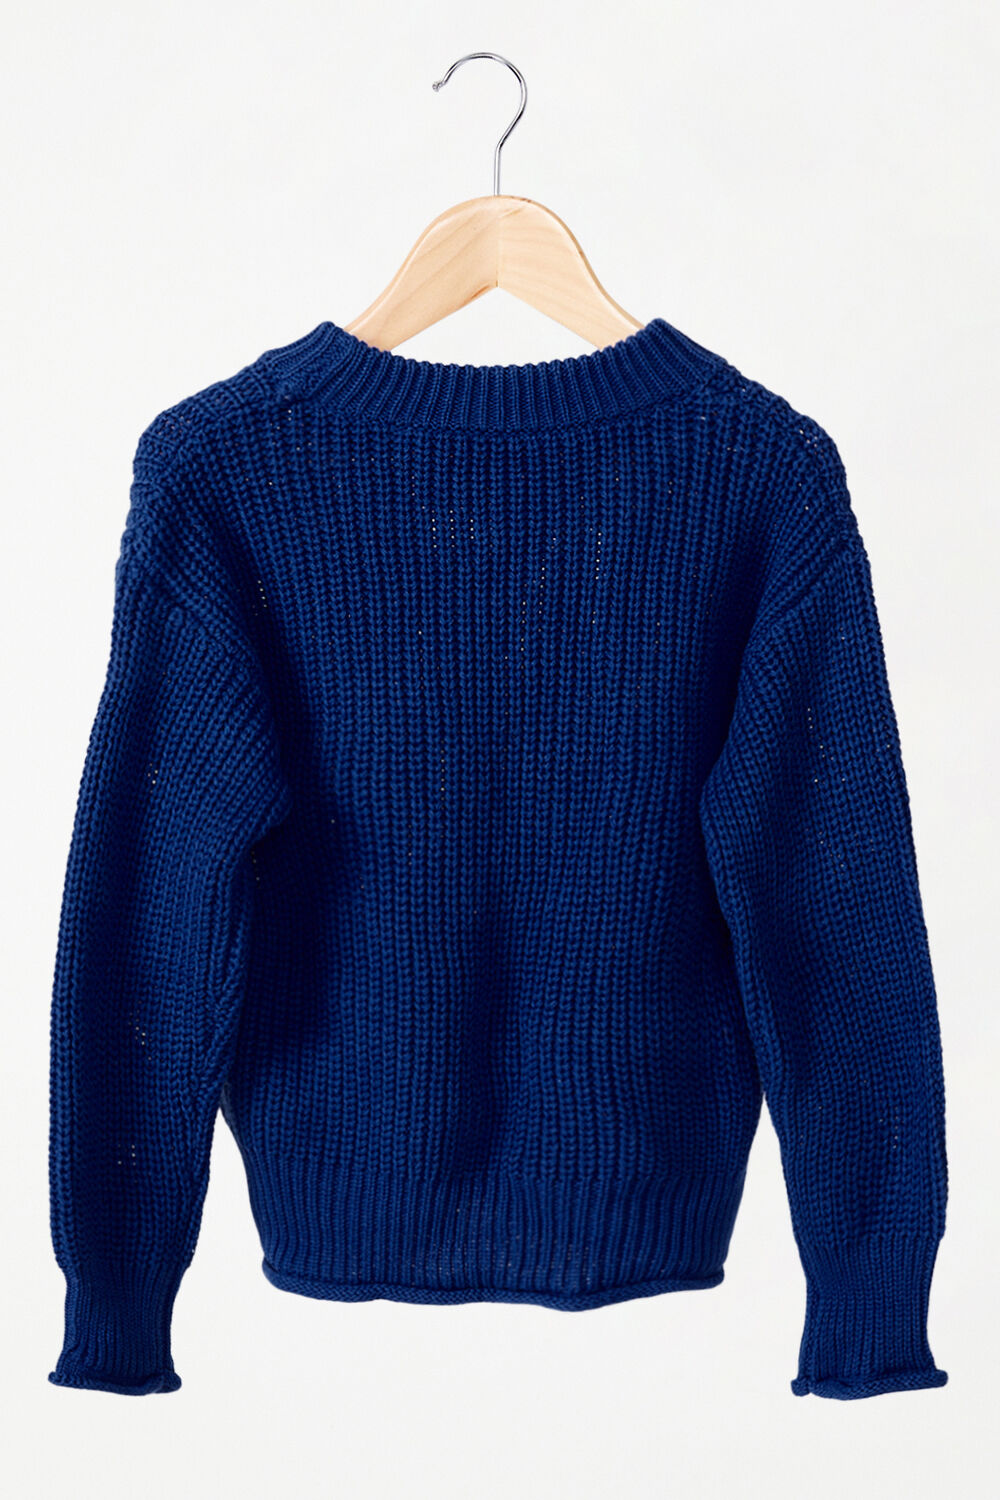 GIRLS HOLLY KNIT JUMPER  in colour BRIGHT COBALT